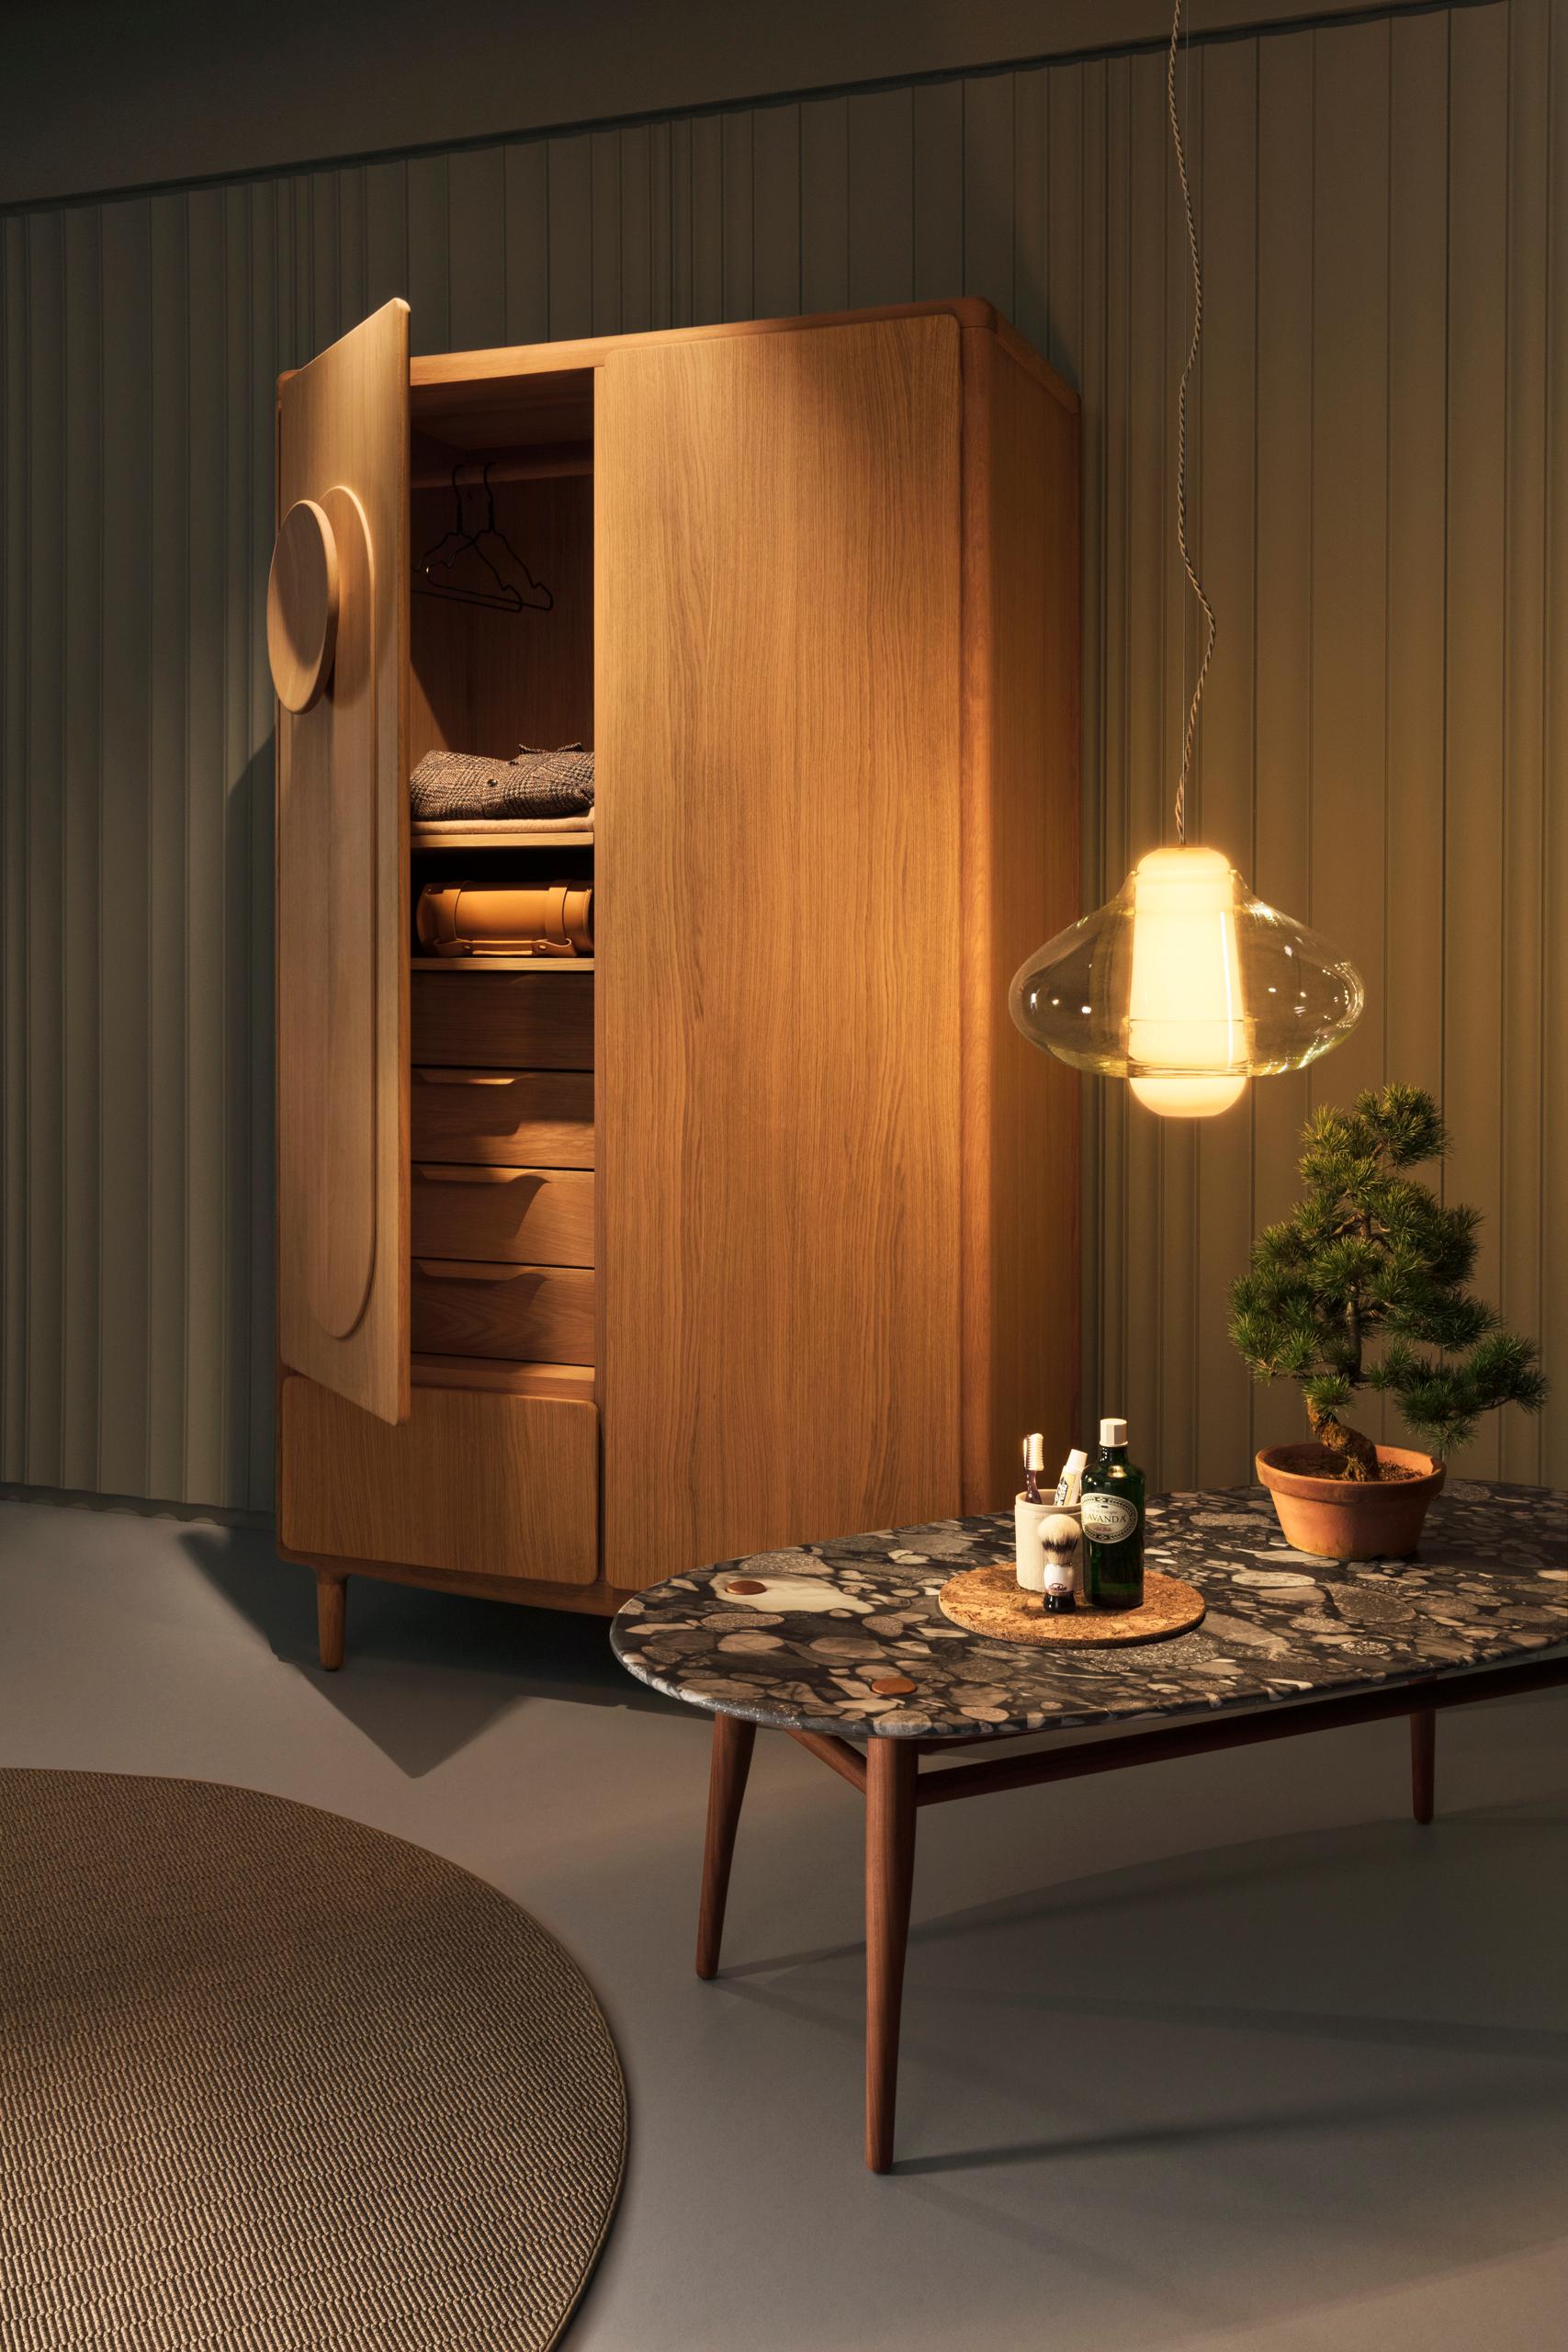 Falmer is designed by Sjoerd Vroonland & Casper Vissers for Revised
Most of the bedrooms and hallways these days have a built-in cupboard from wall to wall. Definitely economic and functional. But where is the charm of the bedrooms we saw many years